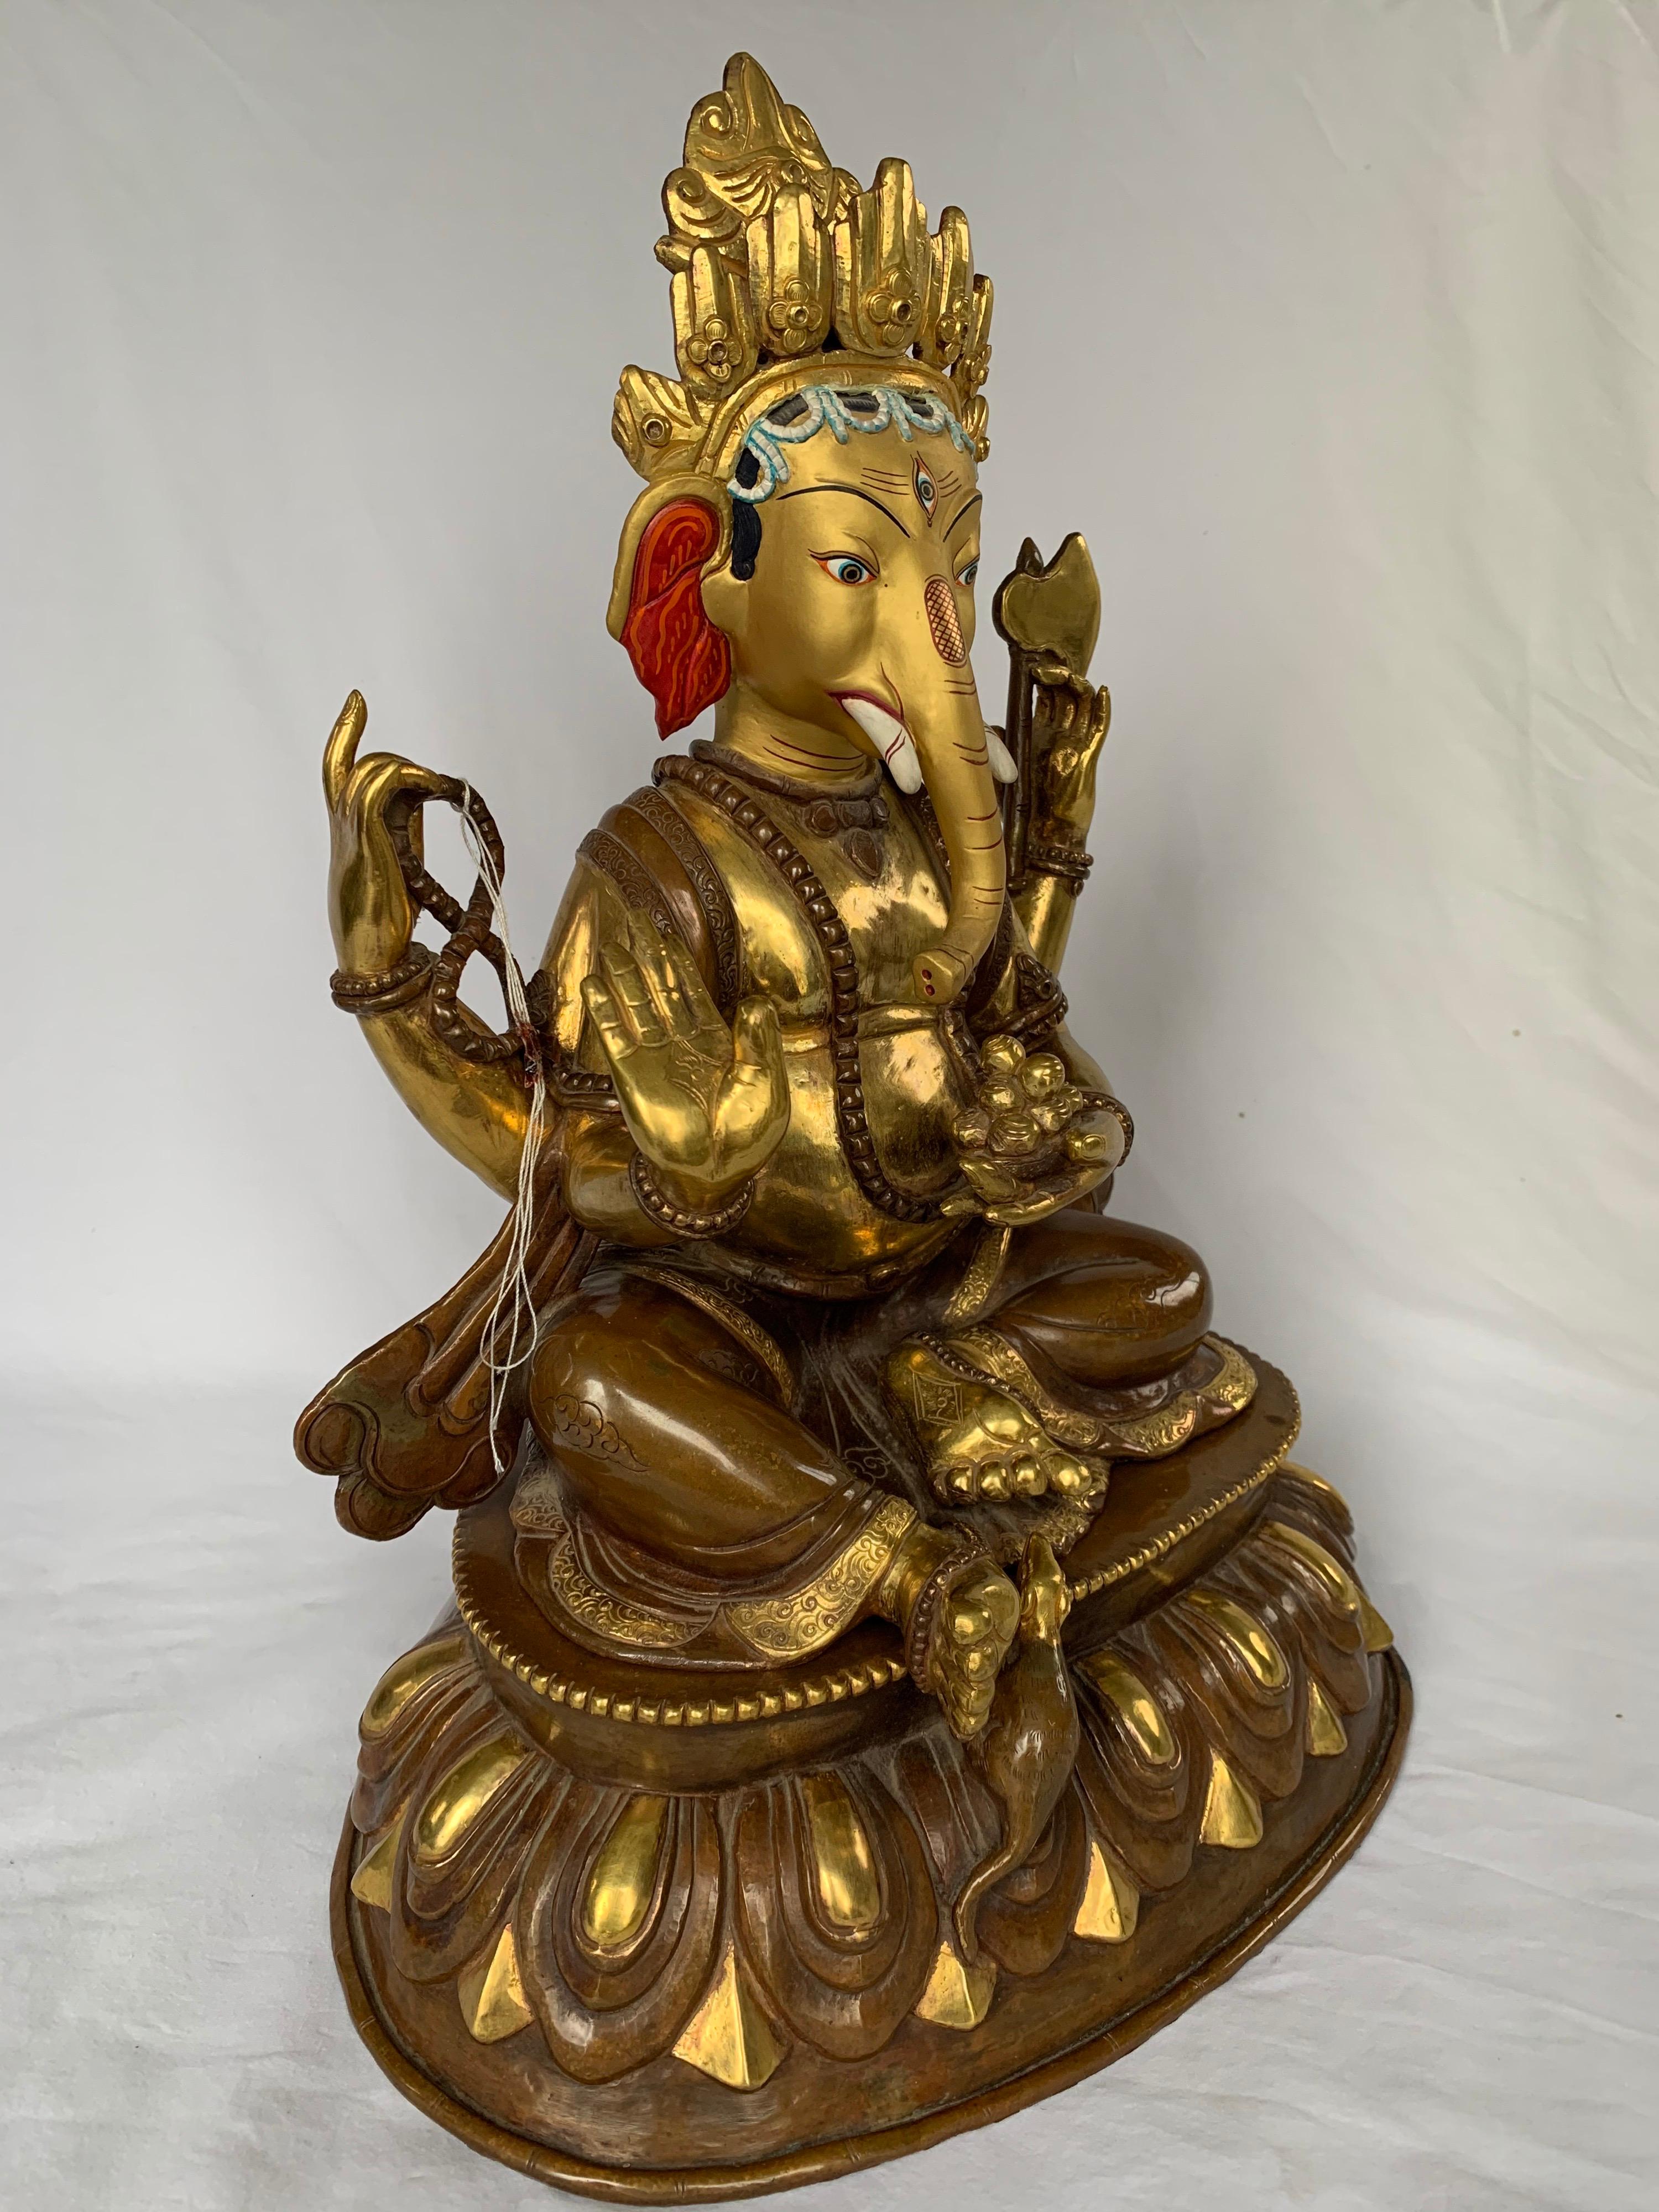  Ganesha Statue with 24 Carat Gold Handcrafted by Lost Wax Process - Brown Figurative Sculpture by Unknown